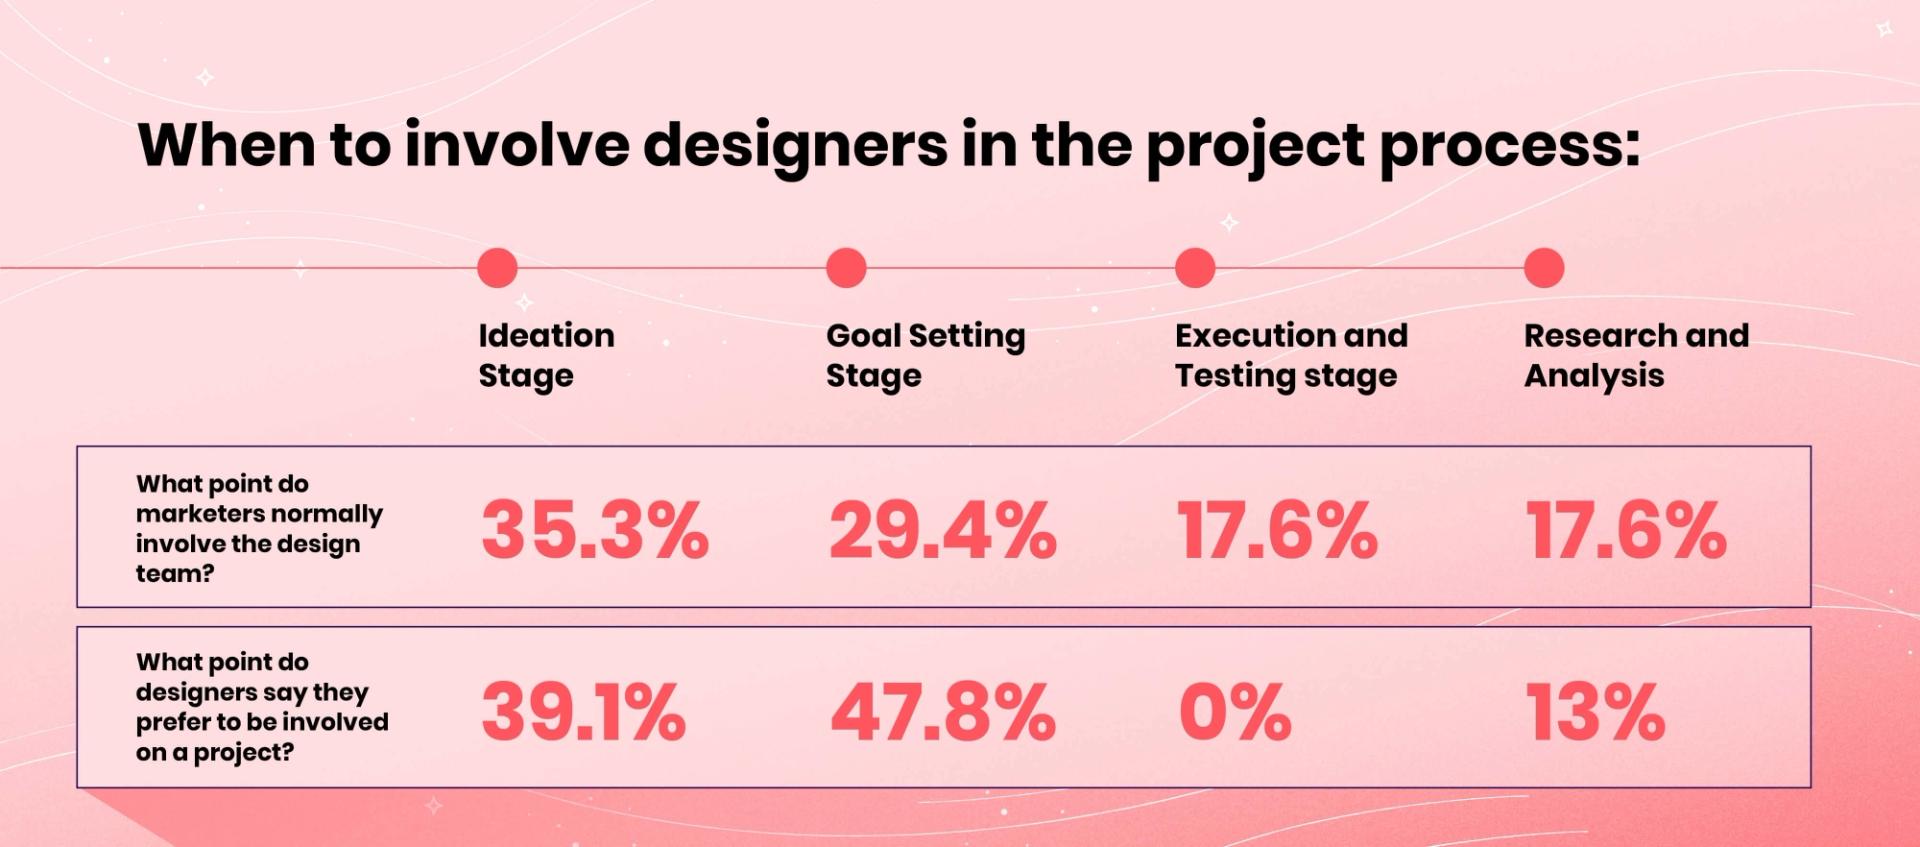 When to involve designers in the project process